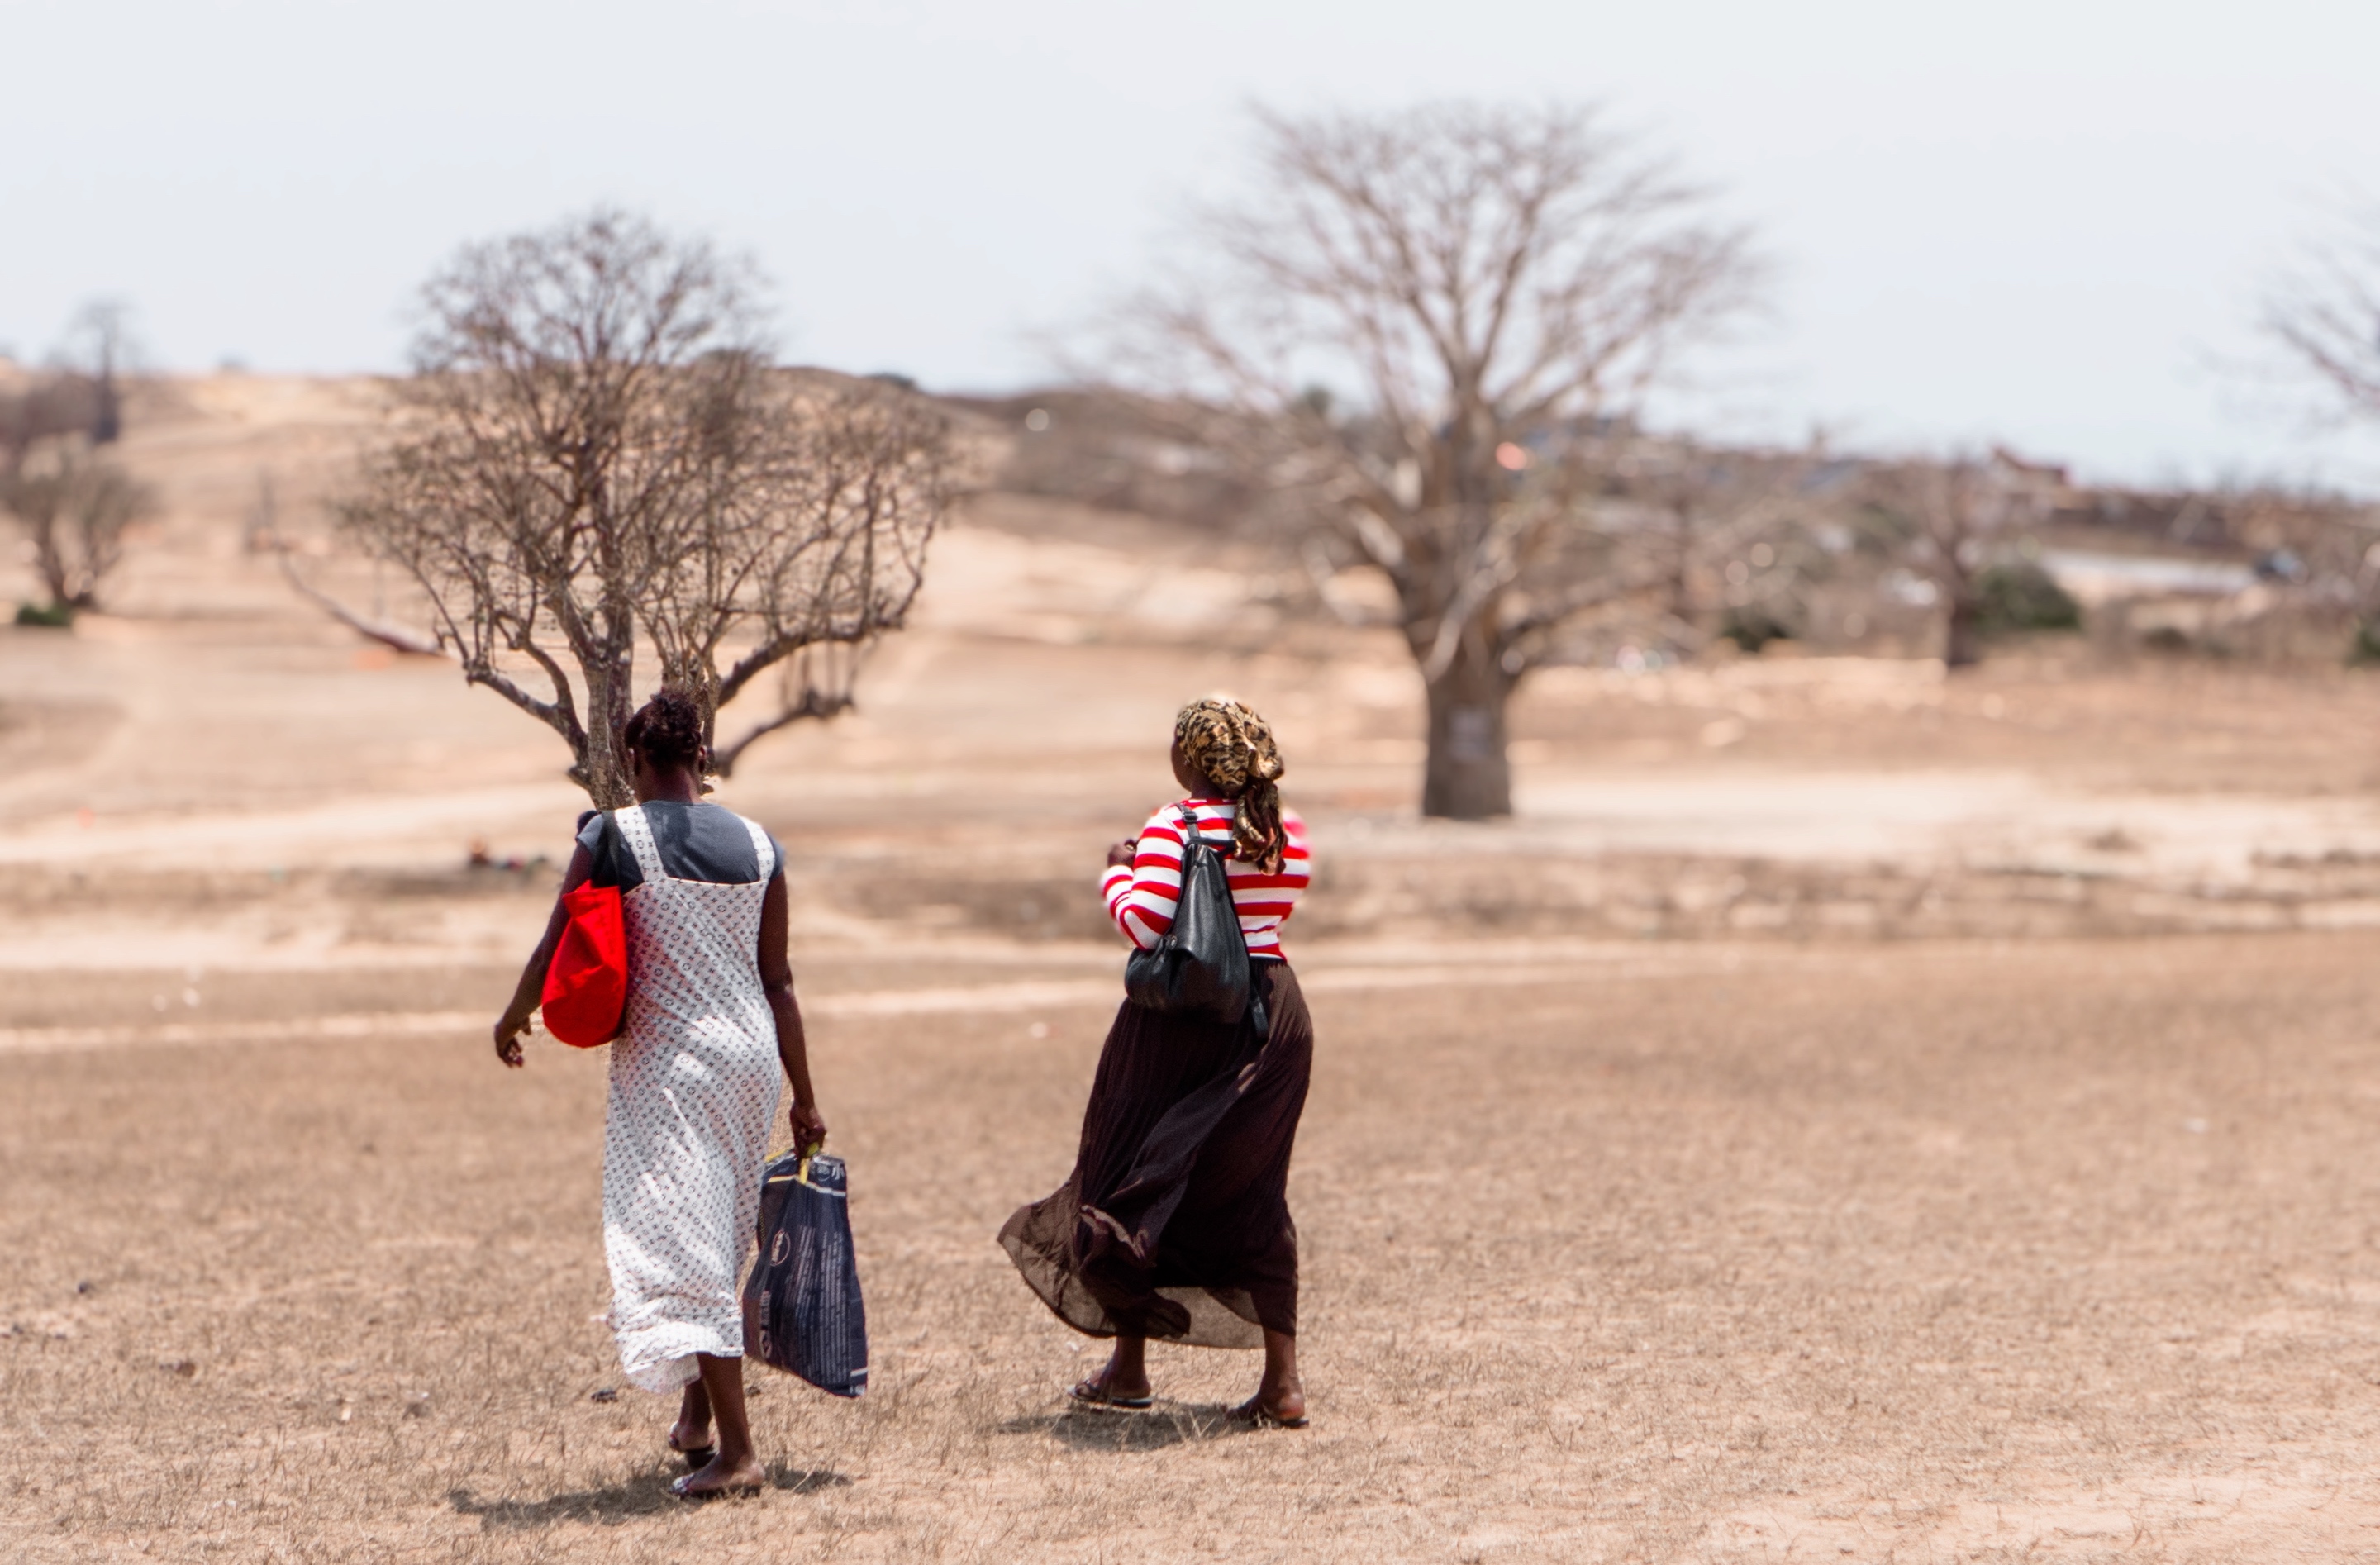 Two women in Angola walk to receive family planning services.